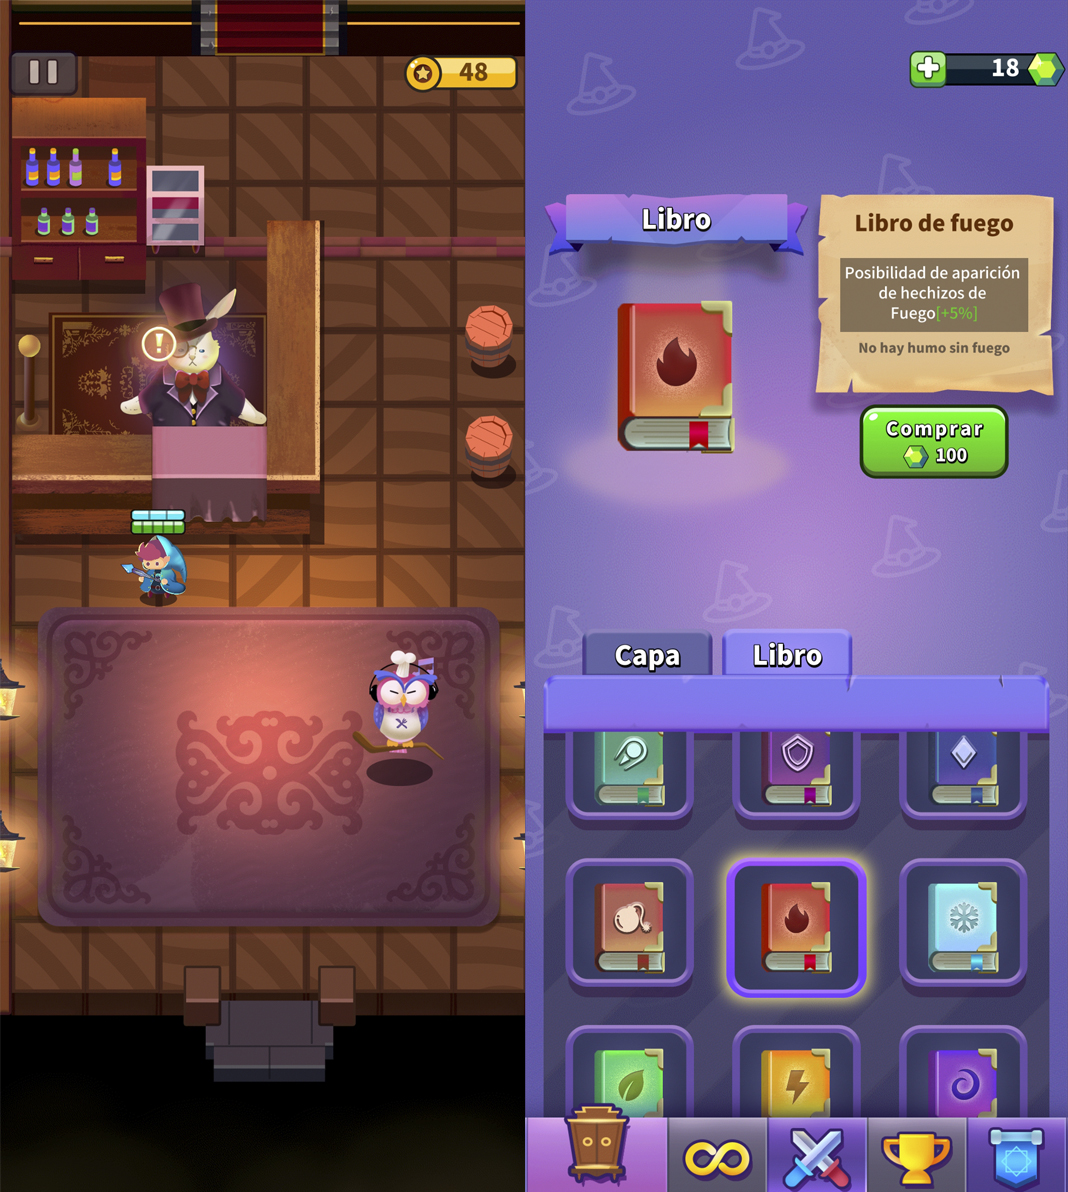 Wizard Legend: Fighting Master review: a roguelite that will cast